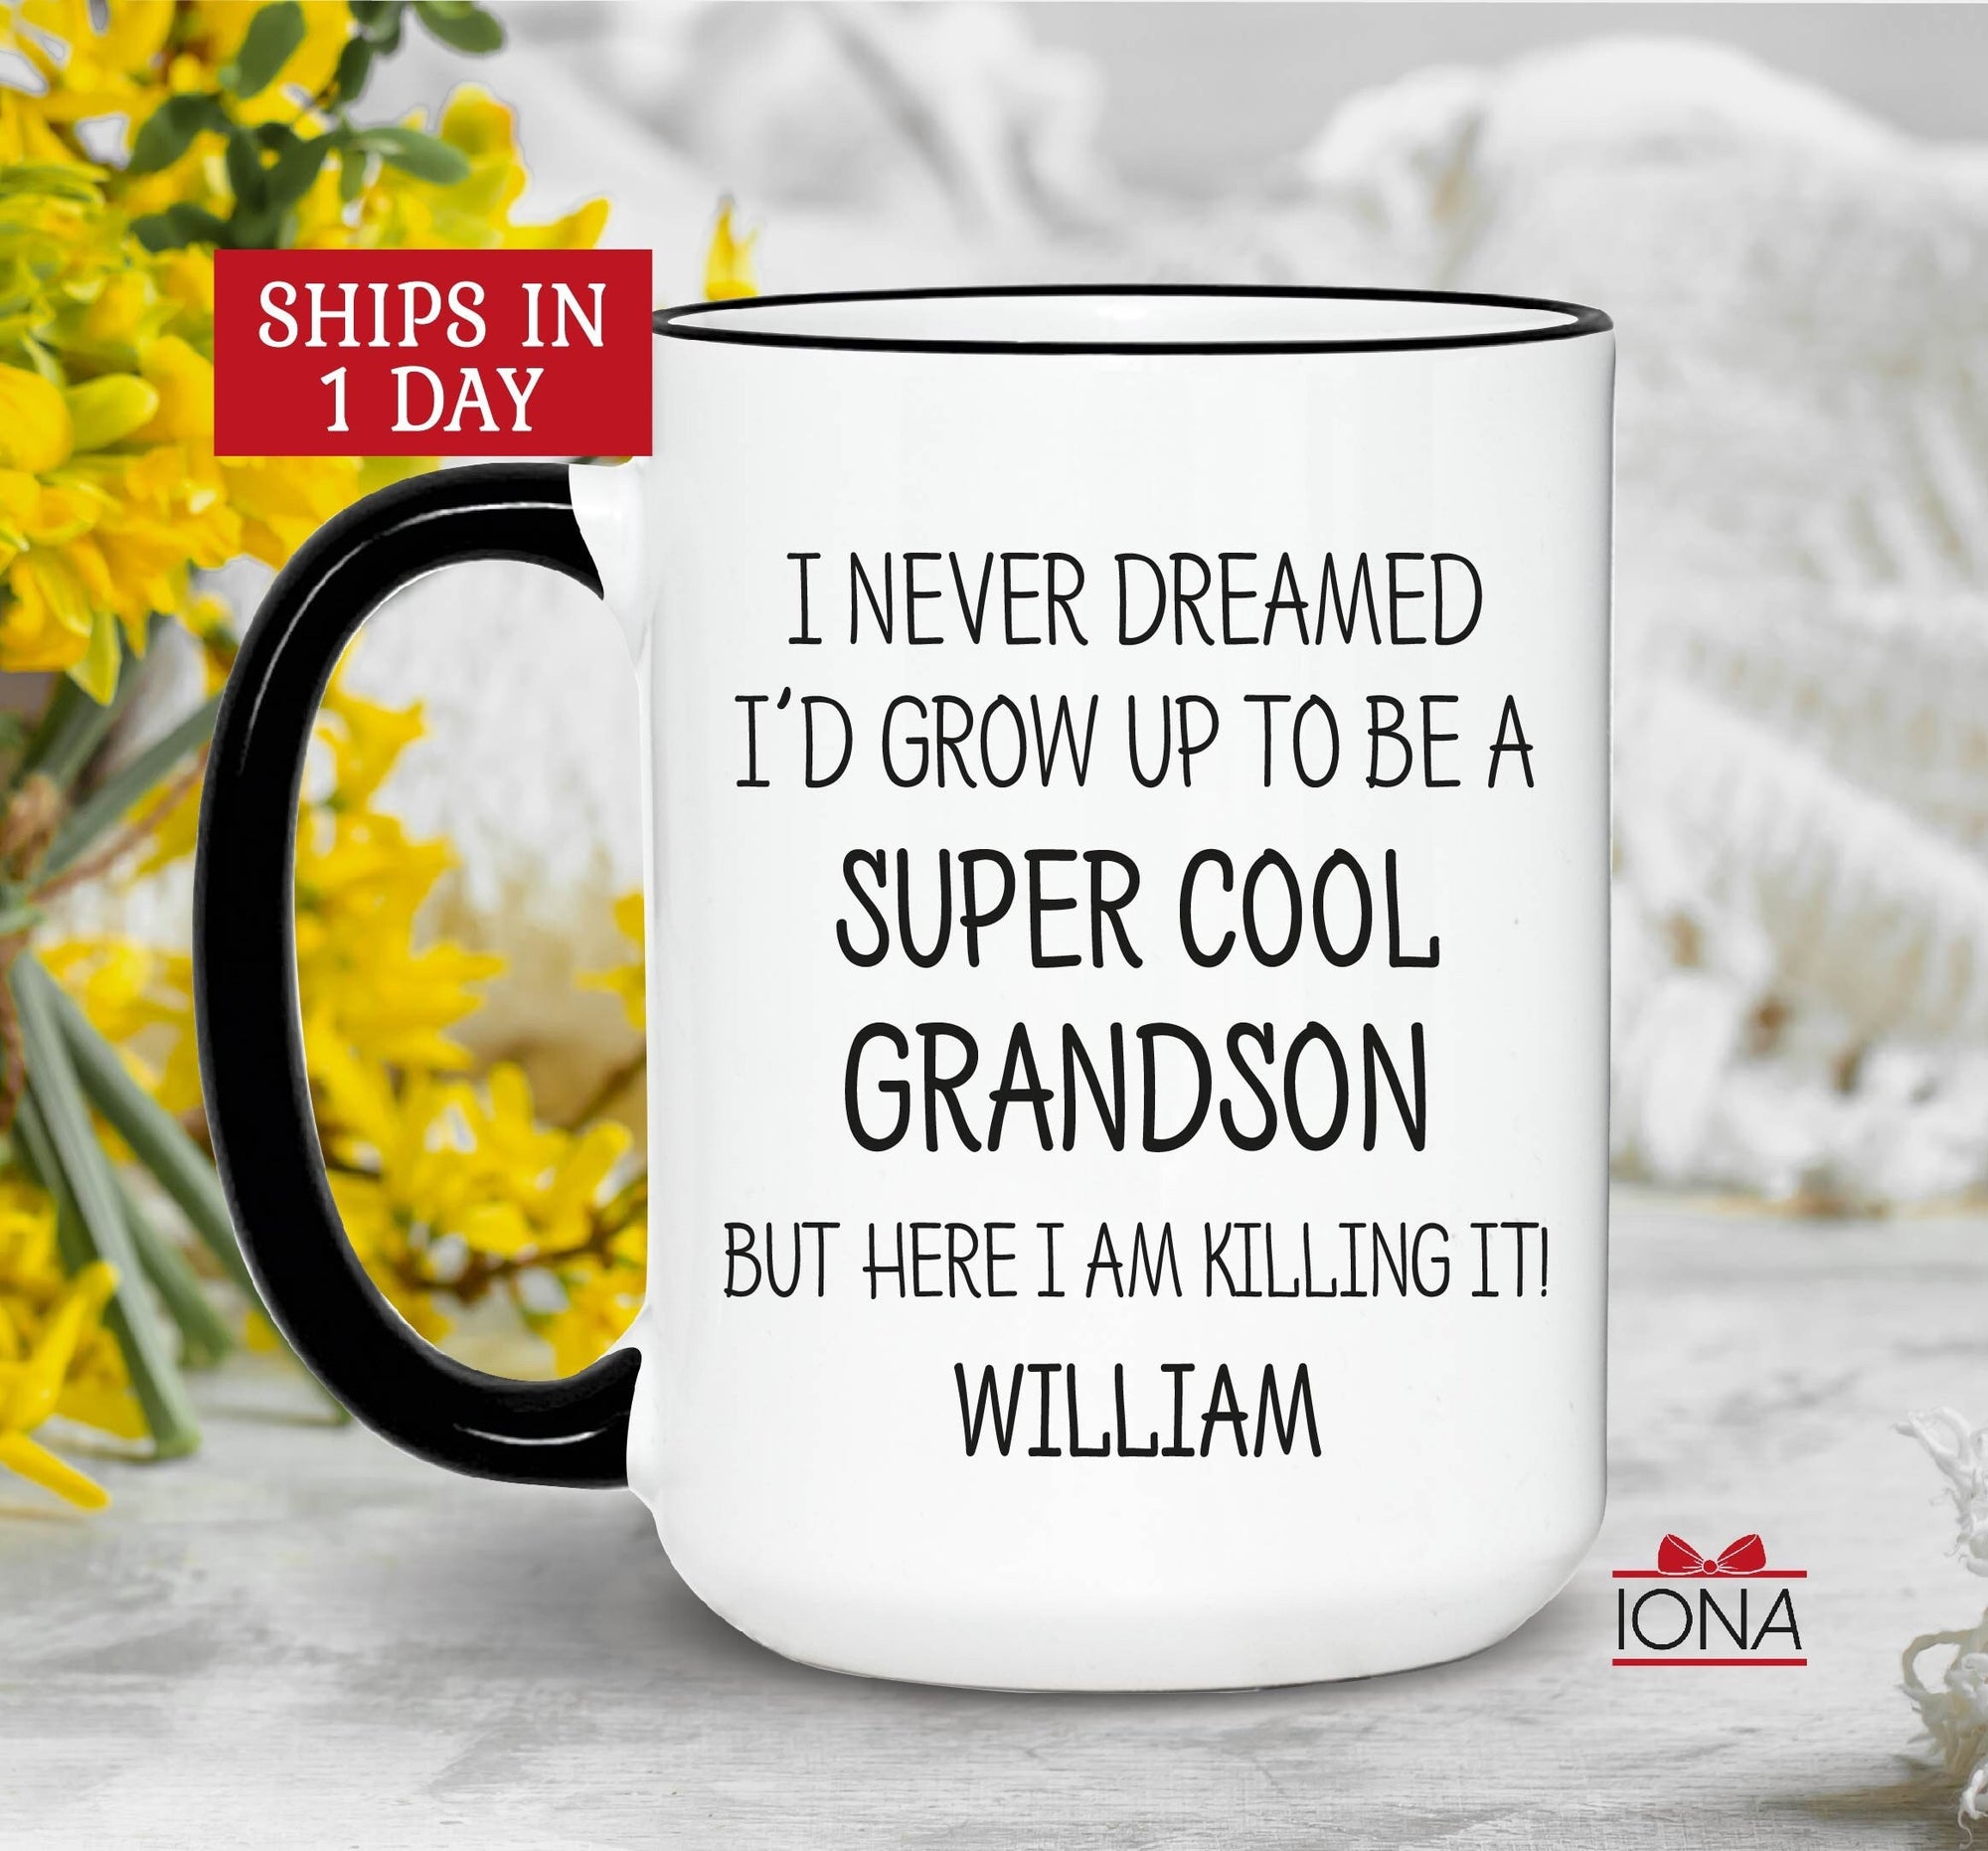 Personalized Funny Grandson Gift, Best Grandson Coffee Mug, I Never Dreamed I'd Grow Up To Be A Super Cool Grandson But Here I Am Killing it